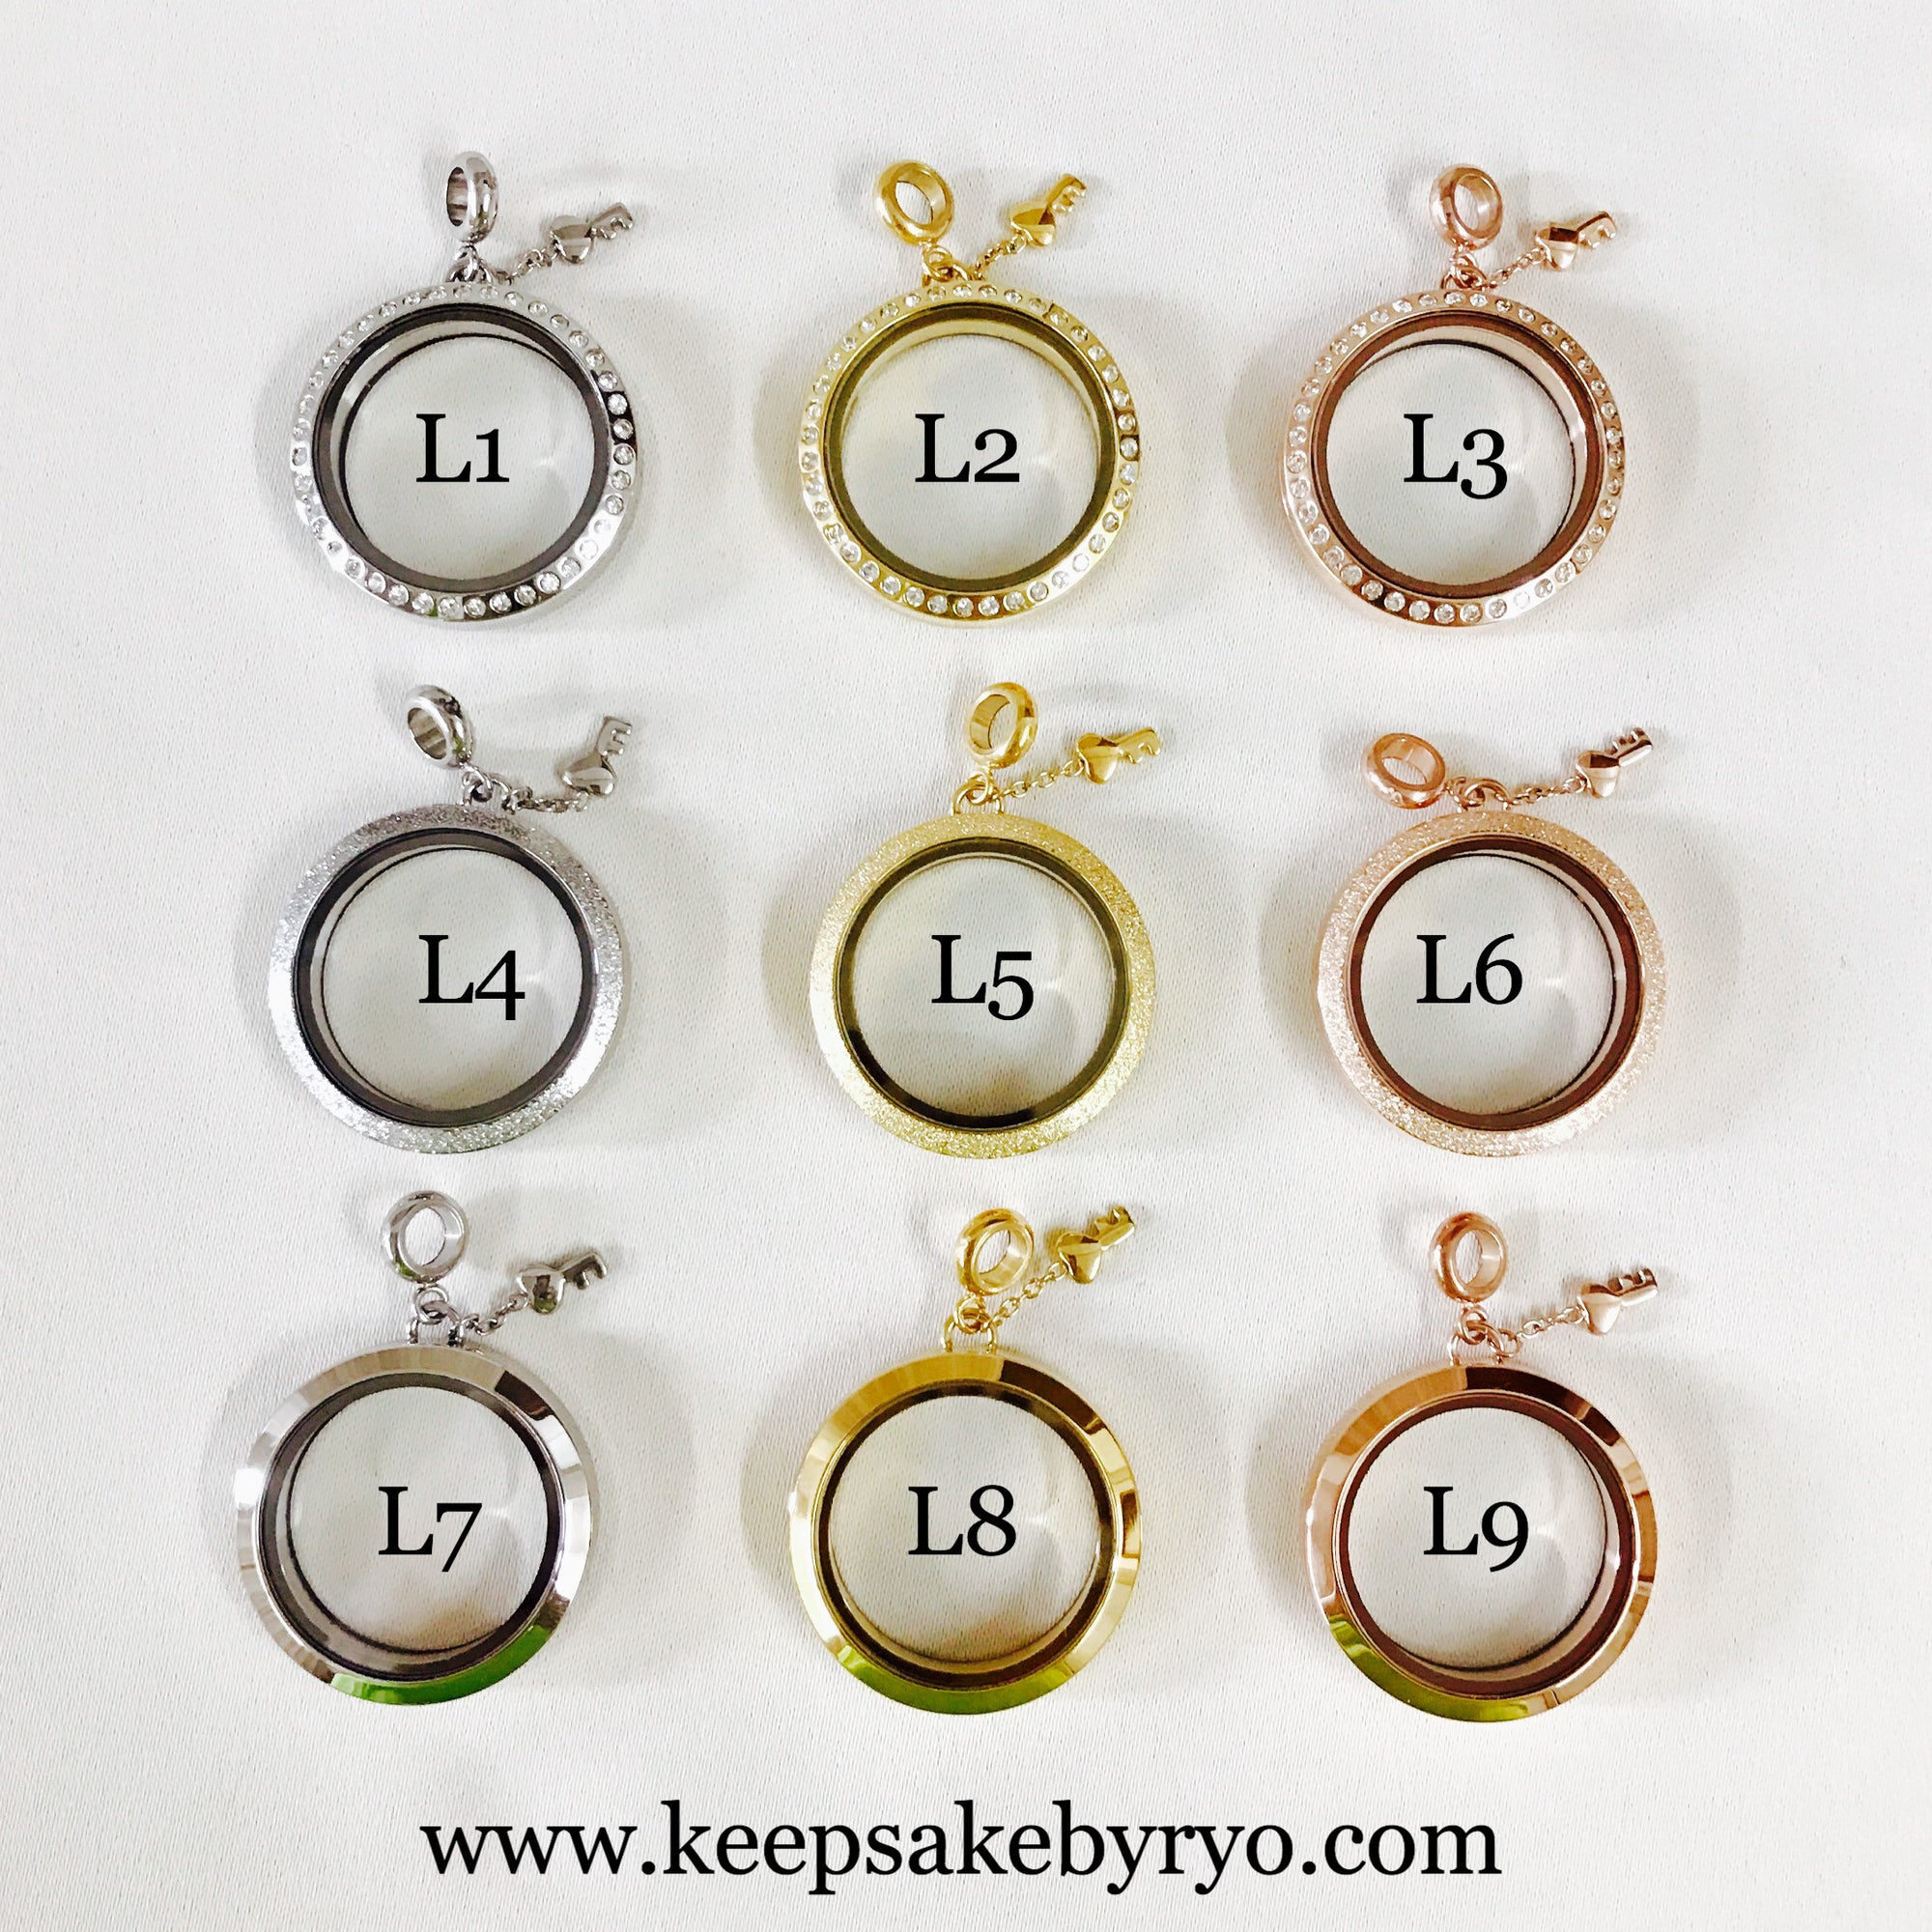 CORD & NAME WITH HAIR PERSONALIZED GLASS LOCKET